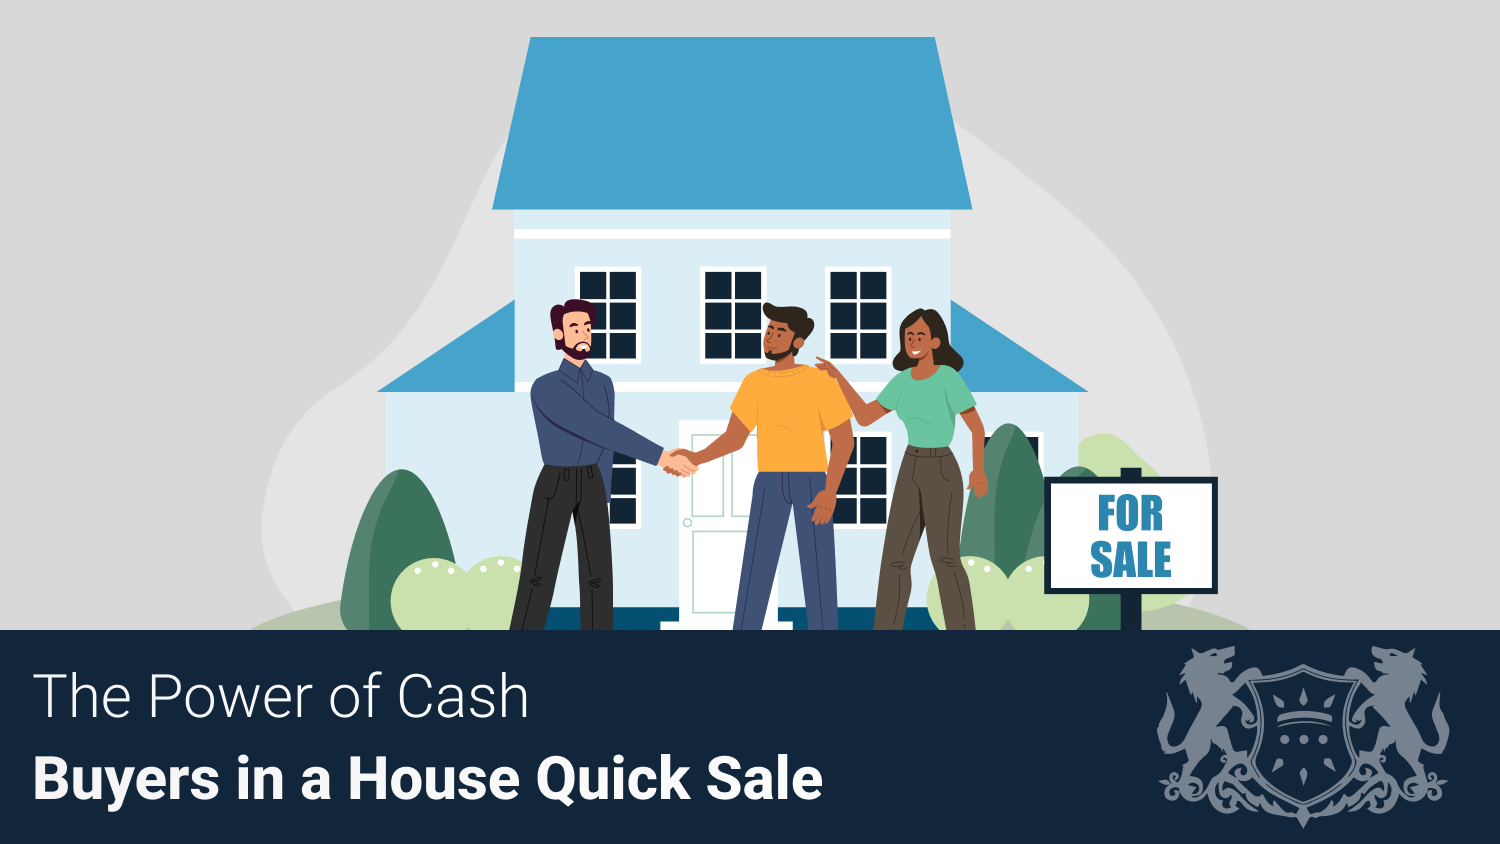 The Power of Cash Buyers in a House Quick Sale